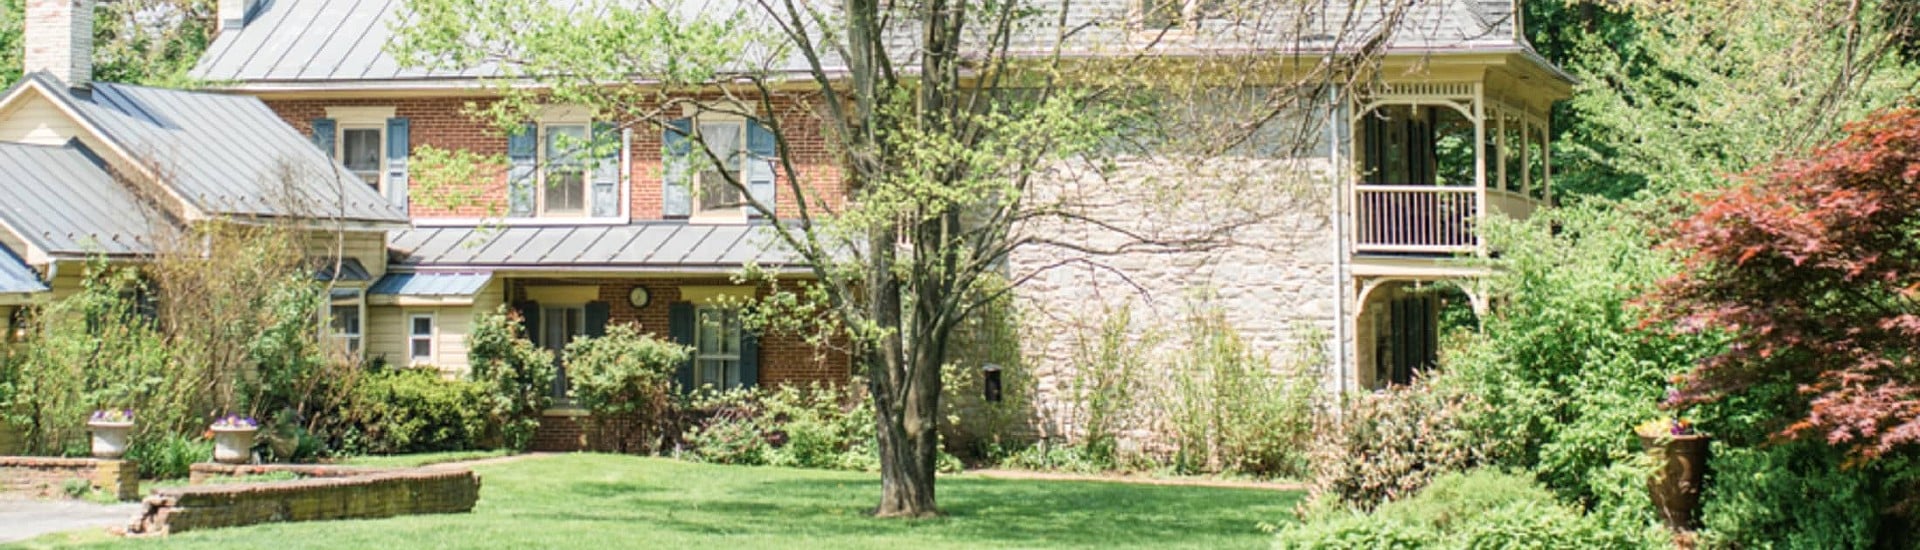 Side view of a spacious home with brick detail, two large outdoor verandas and spacious green lawn